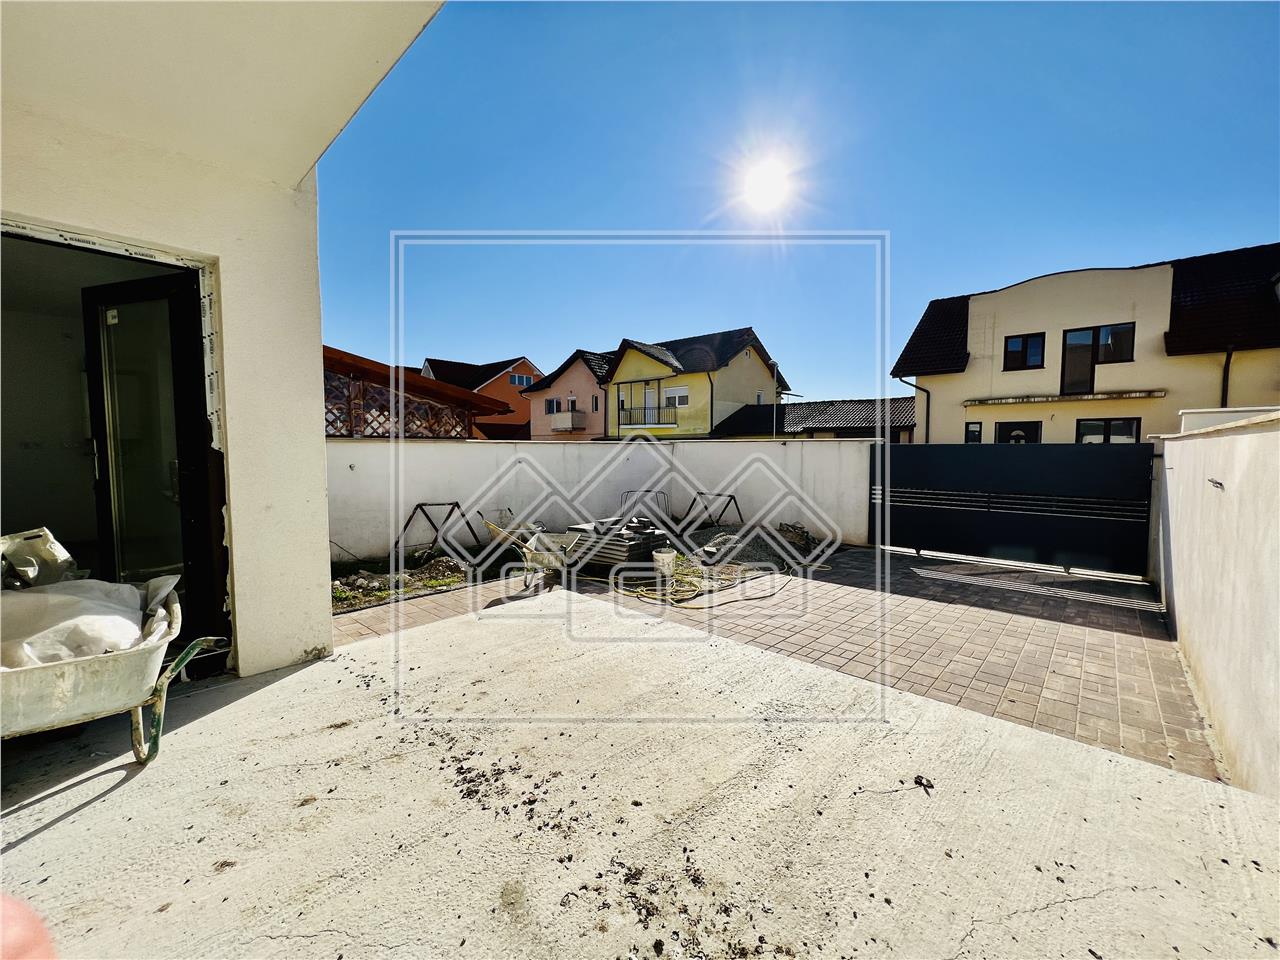 House for sale in Sibiu - triplex type - 146 usable sqm - turnkey deli